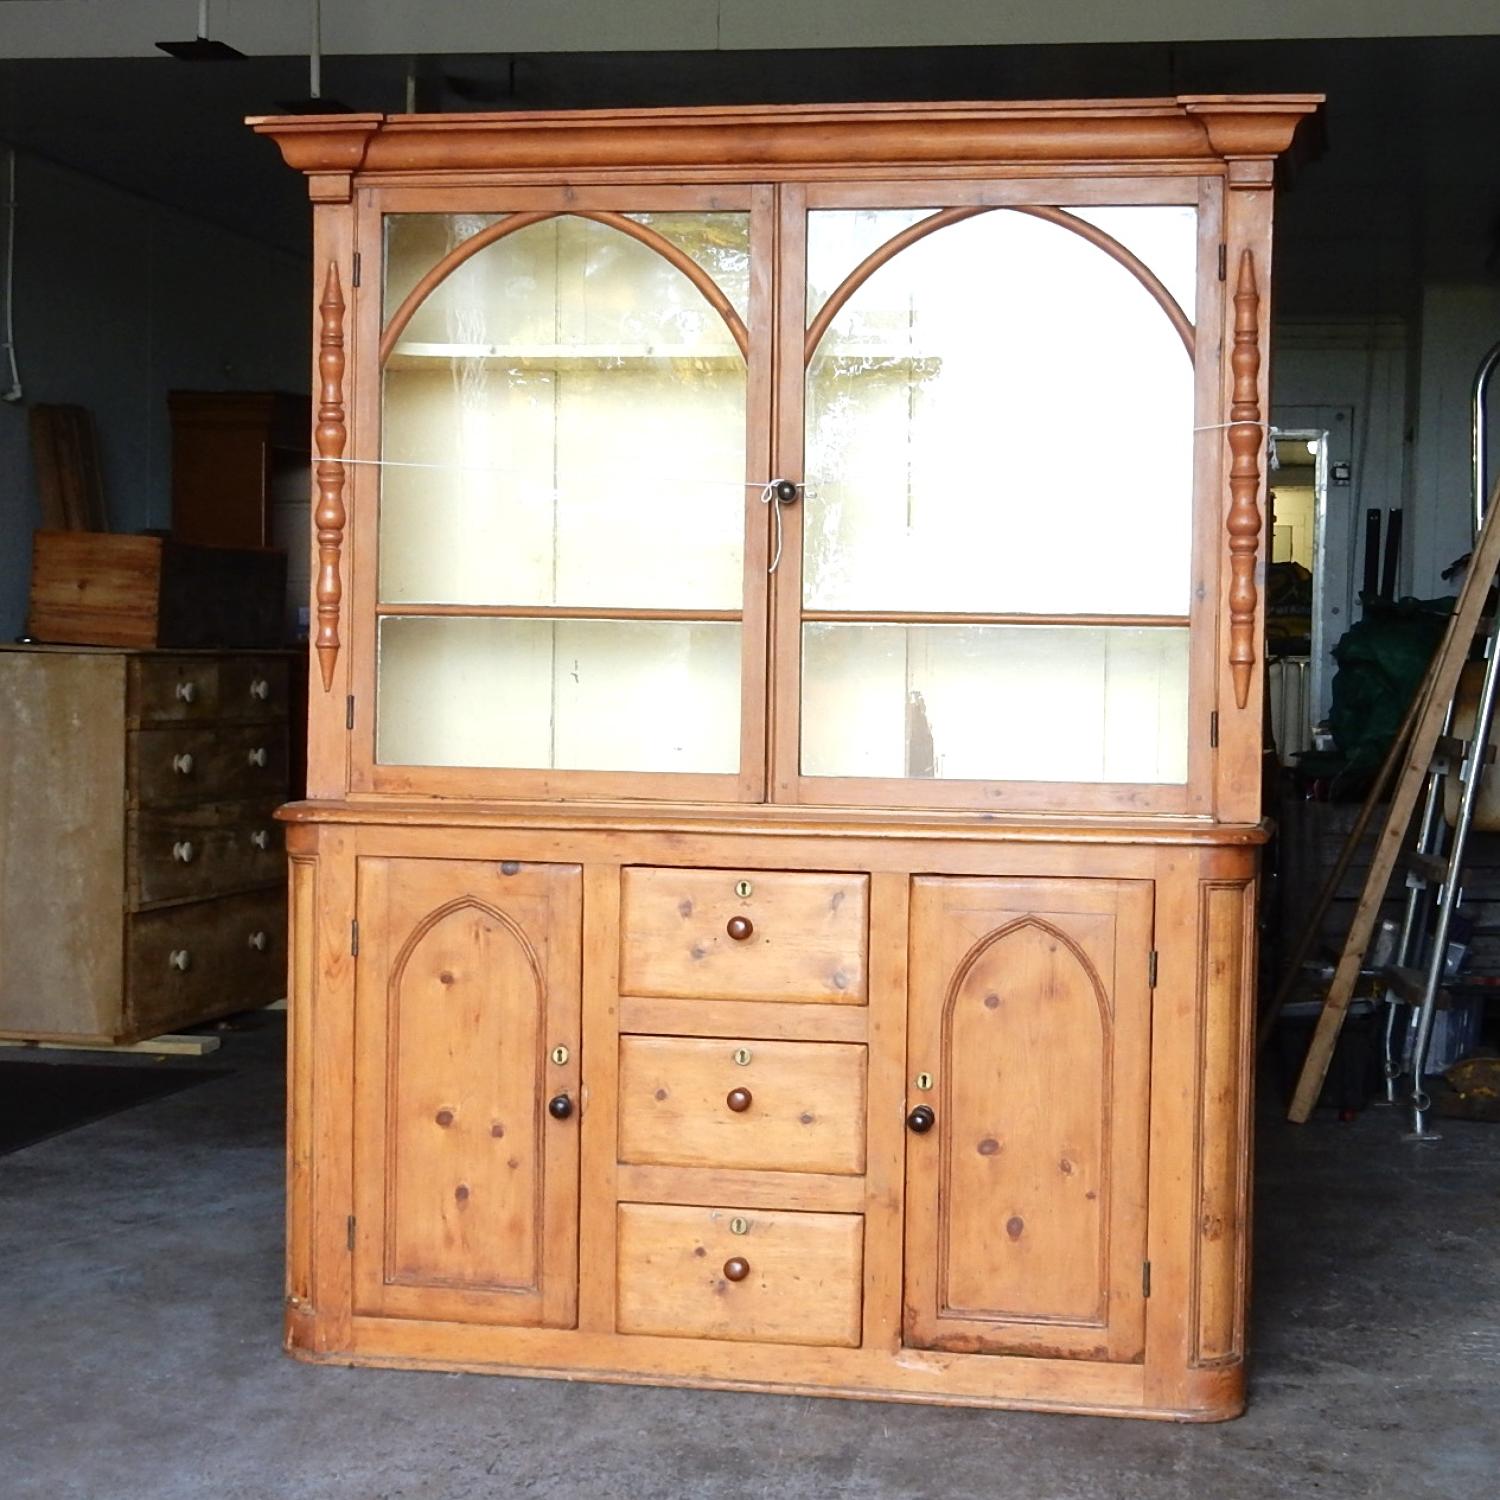 West Country Dresser (project)